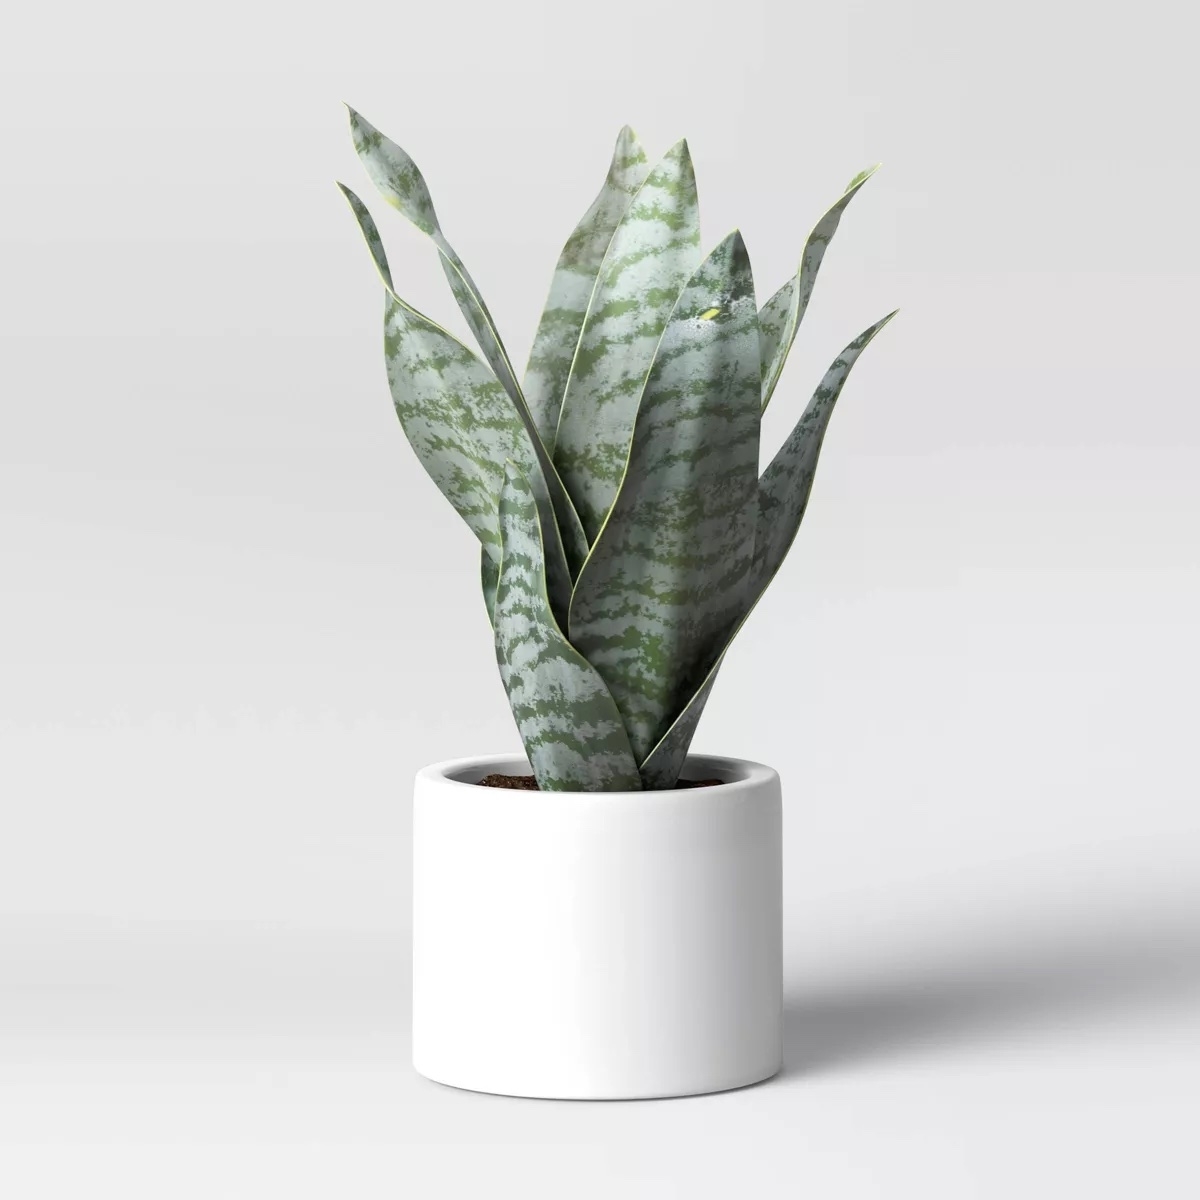 Sansevieria plant in a simple white pot, suitable for modern decor